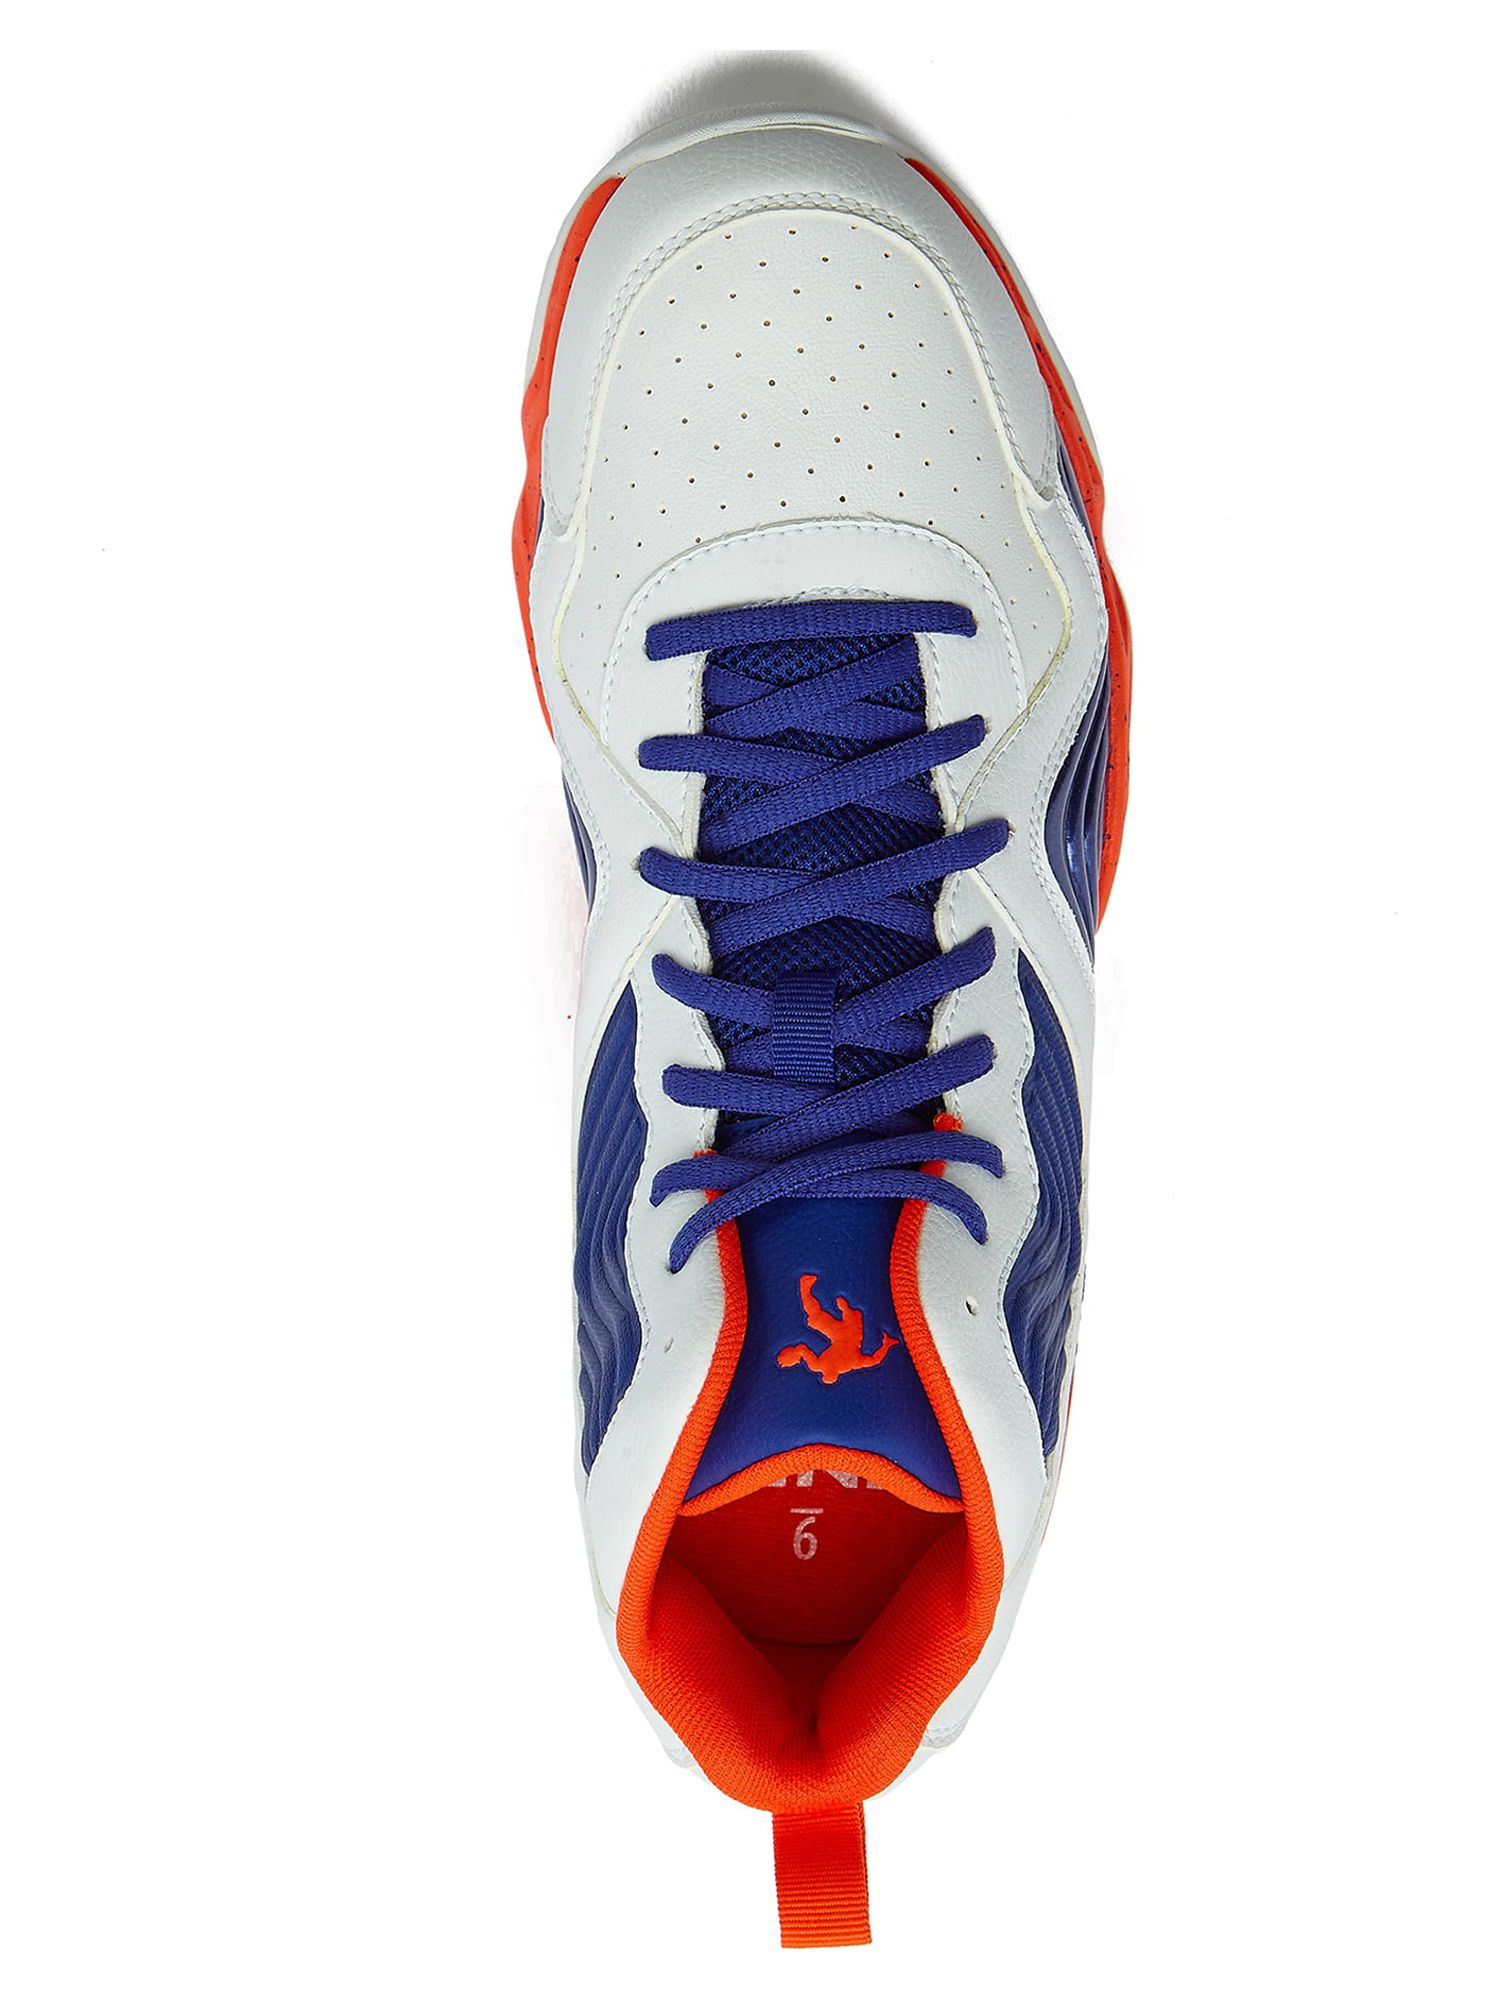 AND1 Men's Maverick Basketball High-Top Sneakers - image 3 of 5